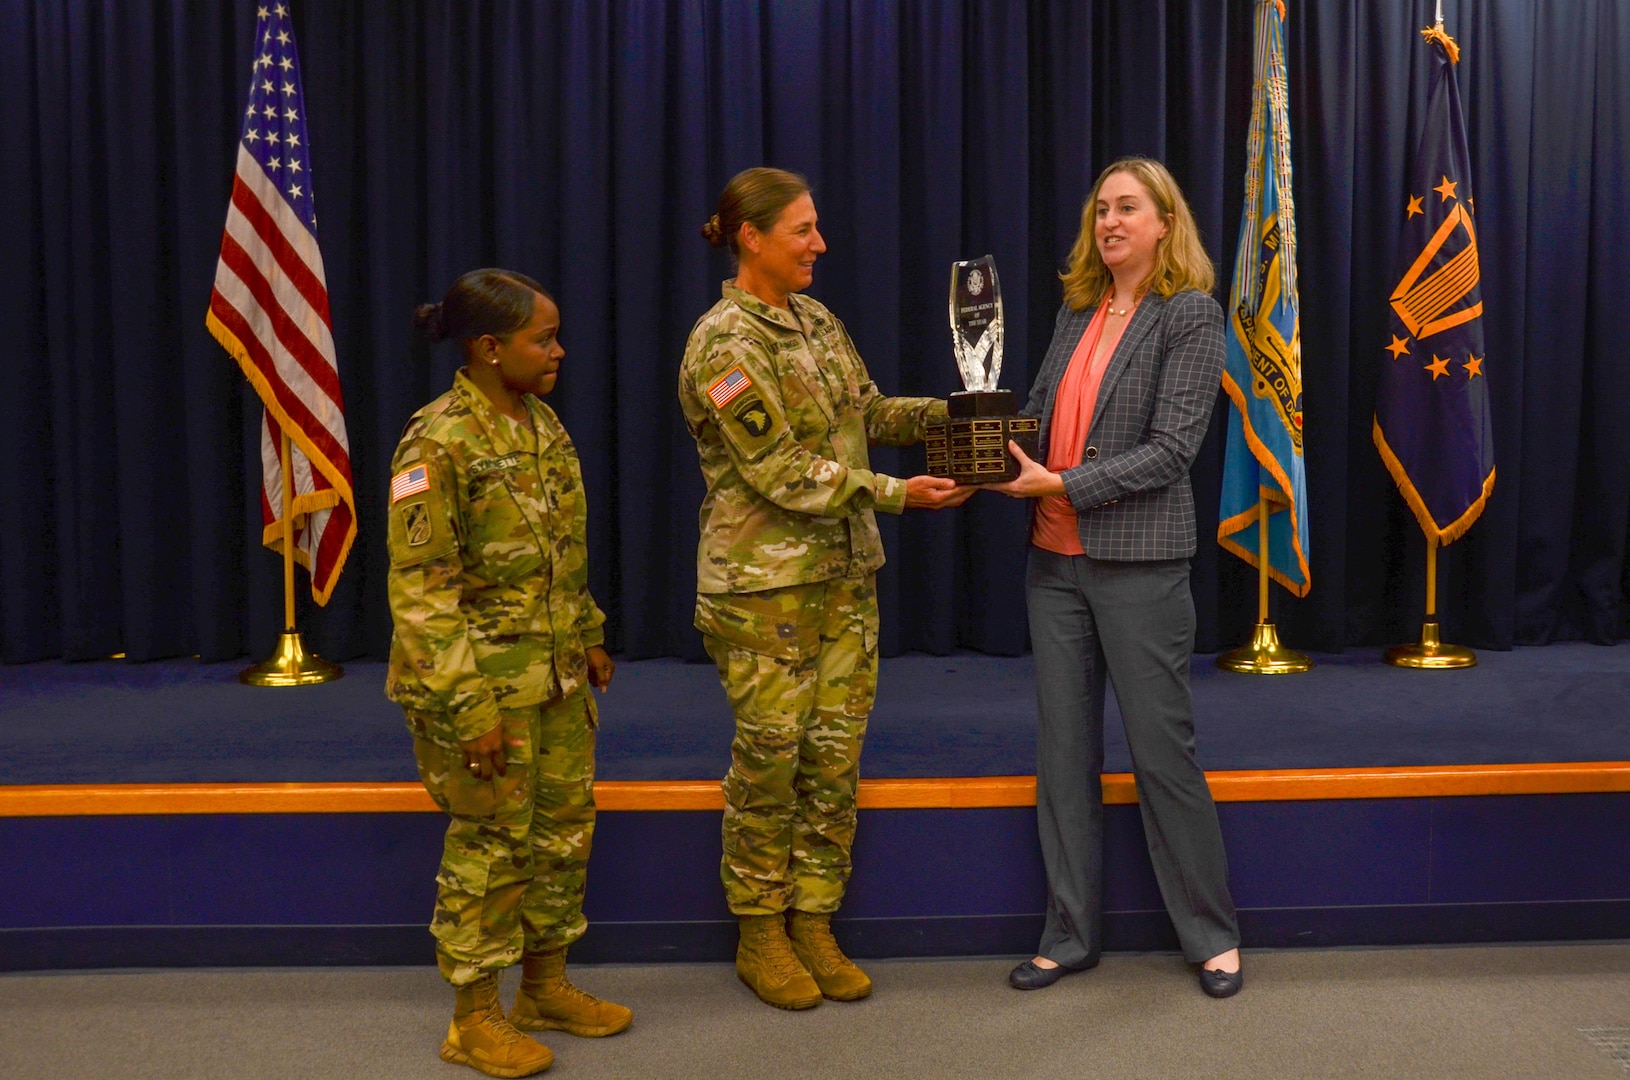 Dr. Katie Helland, director of Military Accession Policy, presents Chicago Federal Executive Board's Agency of the Year trophy to Col. Megan Stallings, USMEPCOM commander, and Command Sgt. Maj. Yveline Symonette, USMEPCOM senior enlisted advisor.